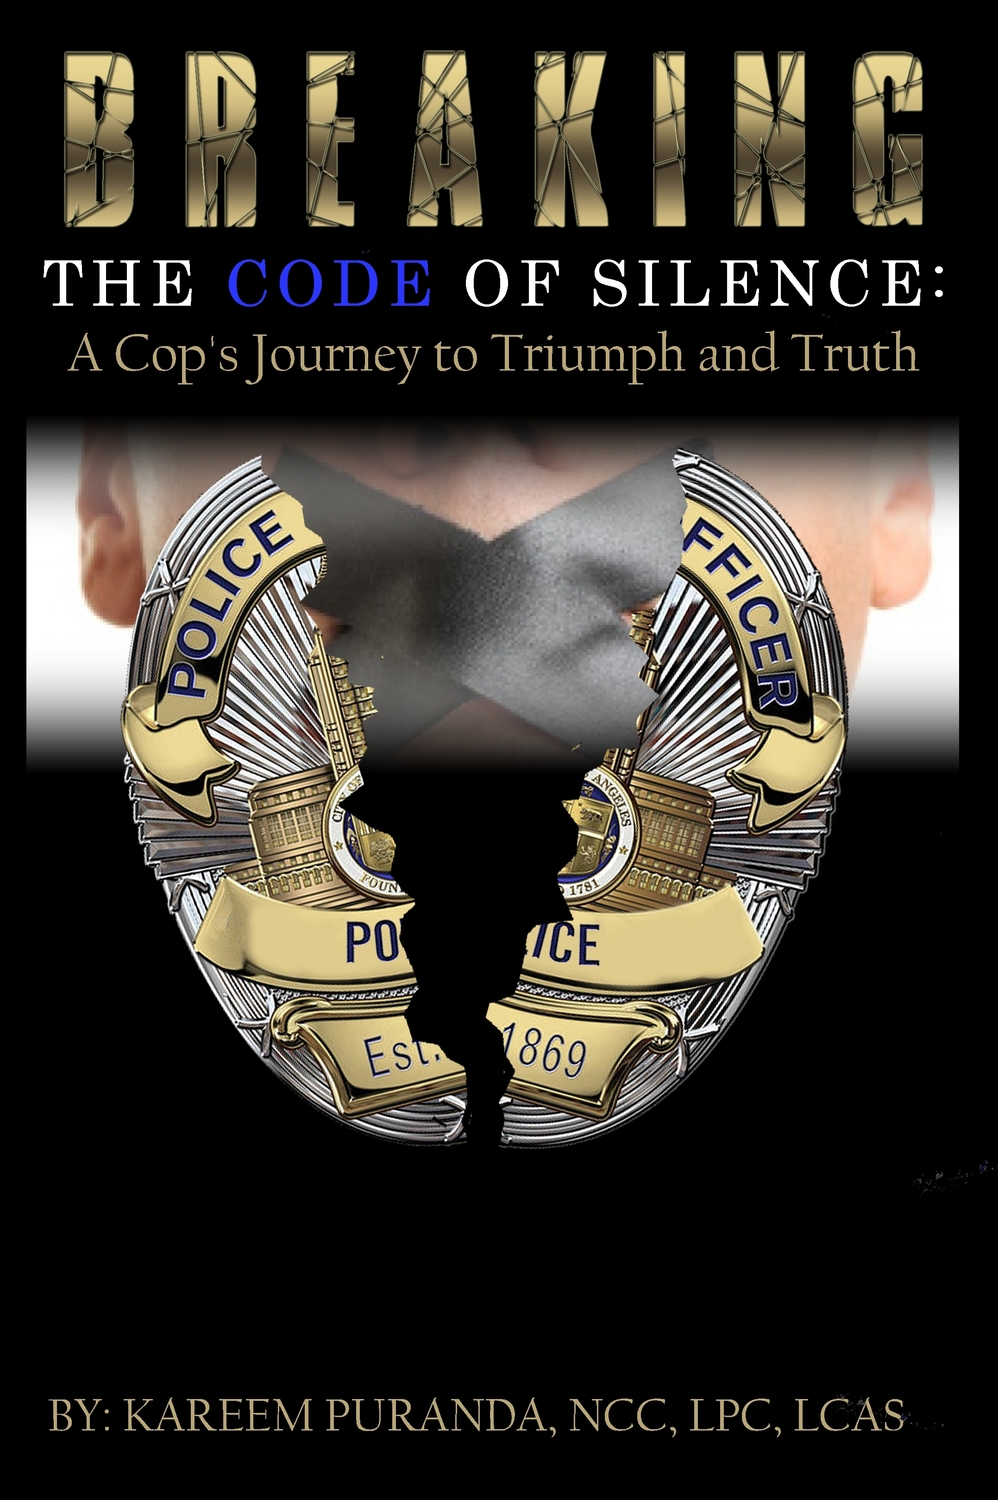 Gallery Photo of This best seller exposes mental health challenges behind the badge like never before. Purchase your copy at www.selftalkcounseling.com today.